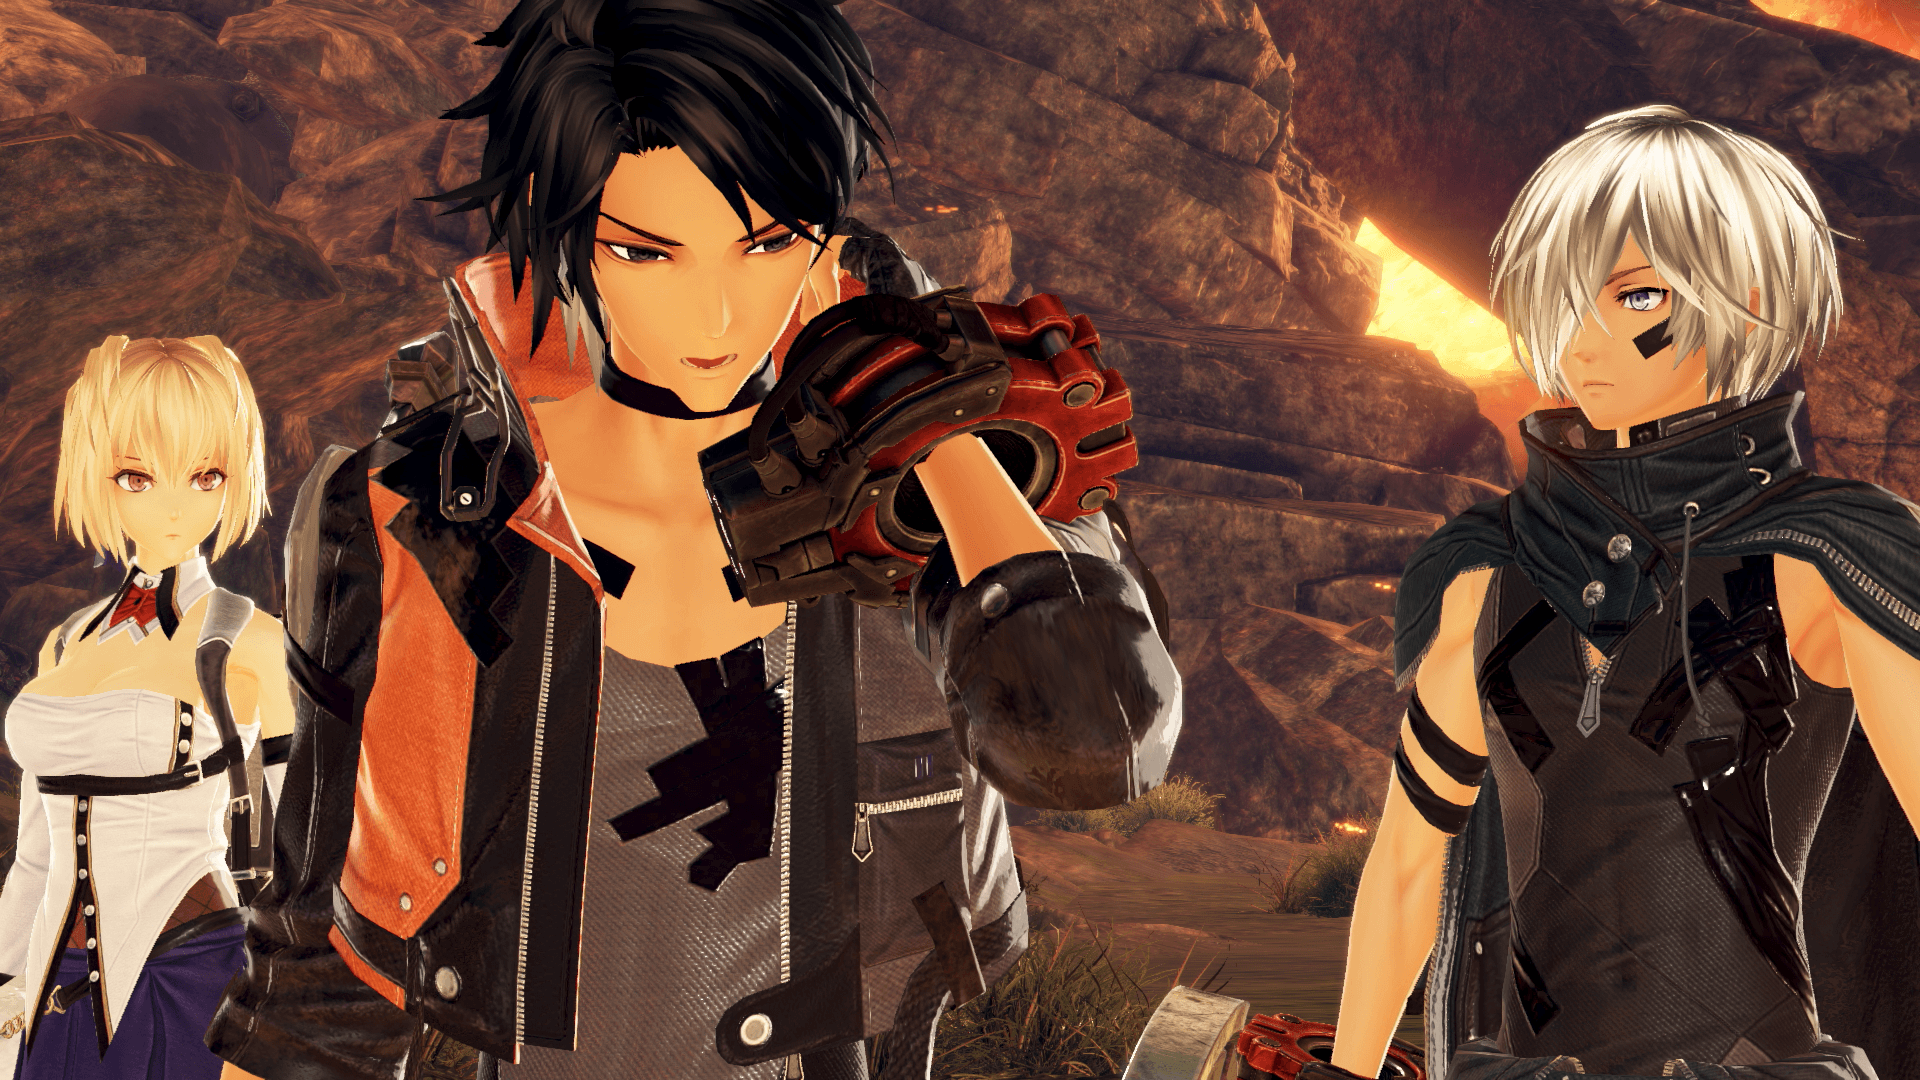 God Eater 3 Brings Dual Audio to the Series